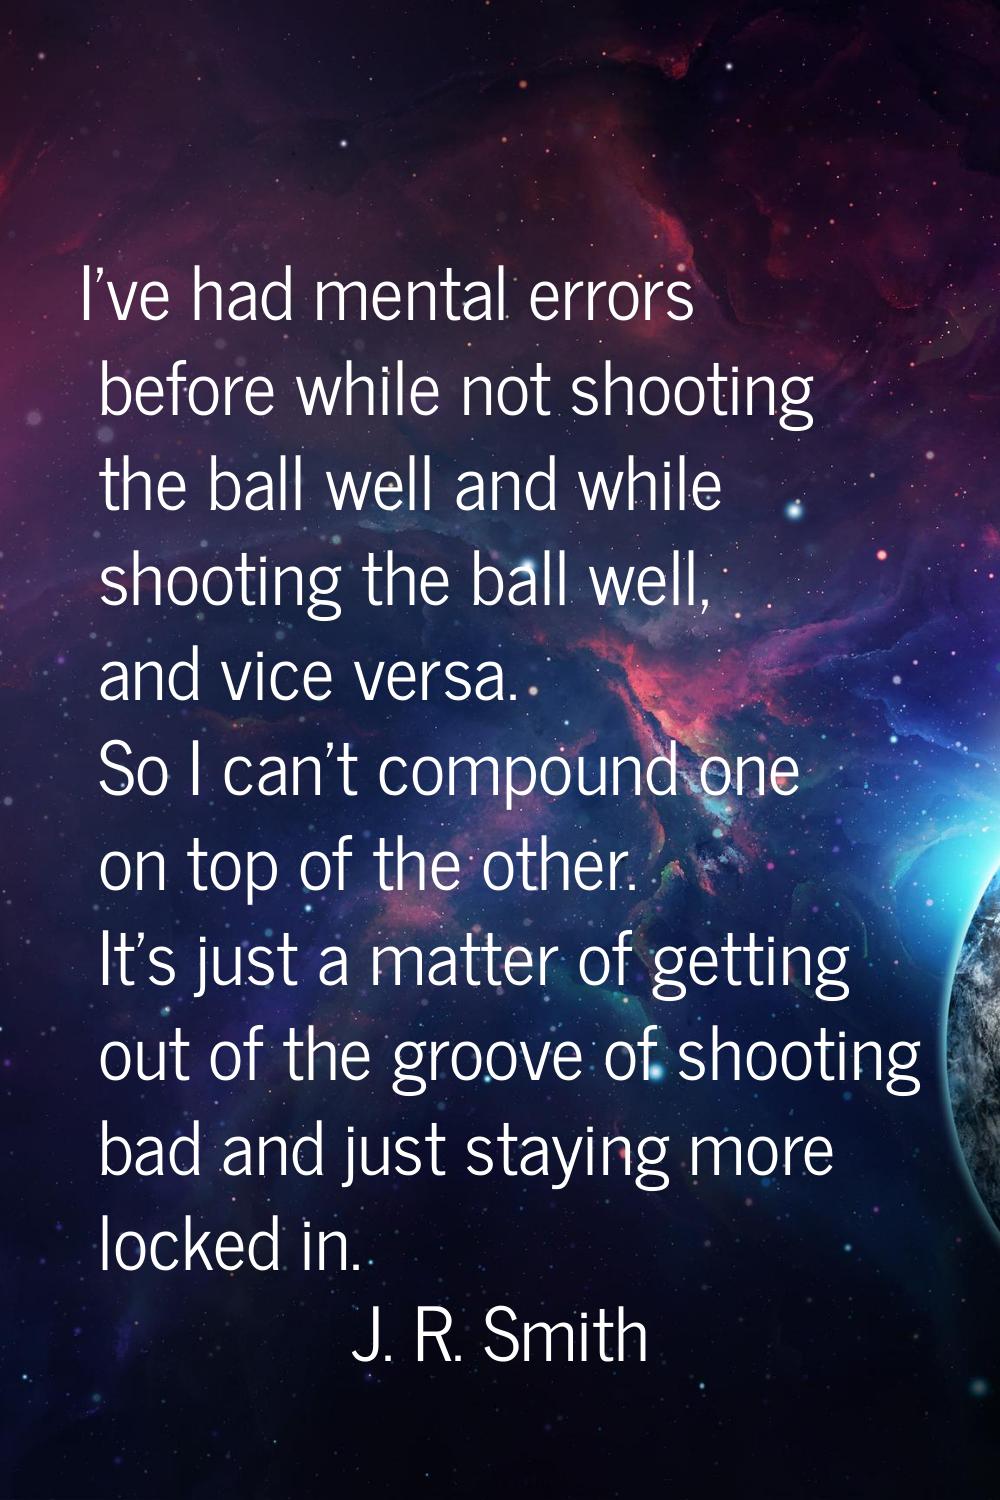 I've had mental errors before while not shooting the ball well and while shooting the ball well, an